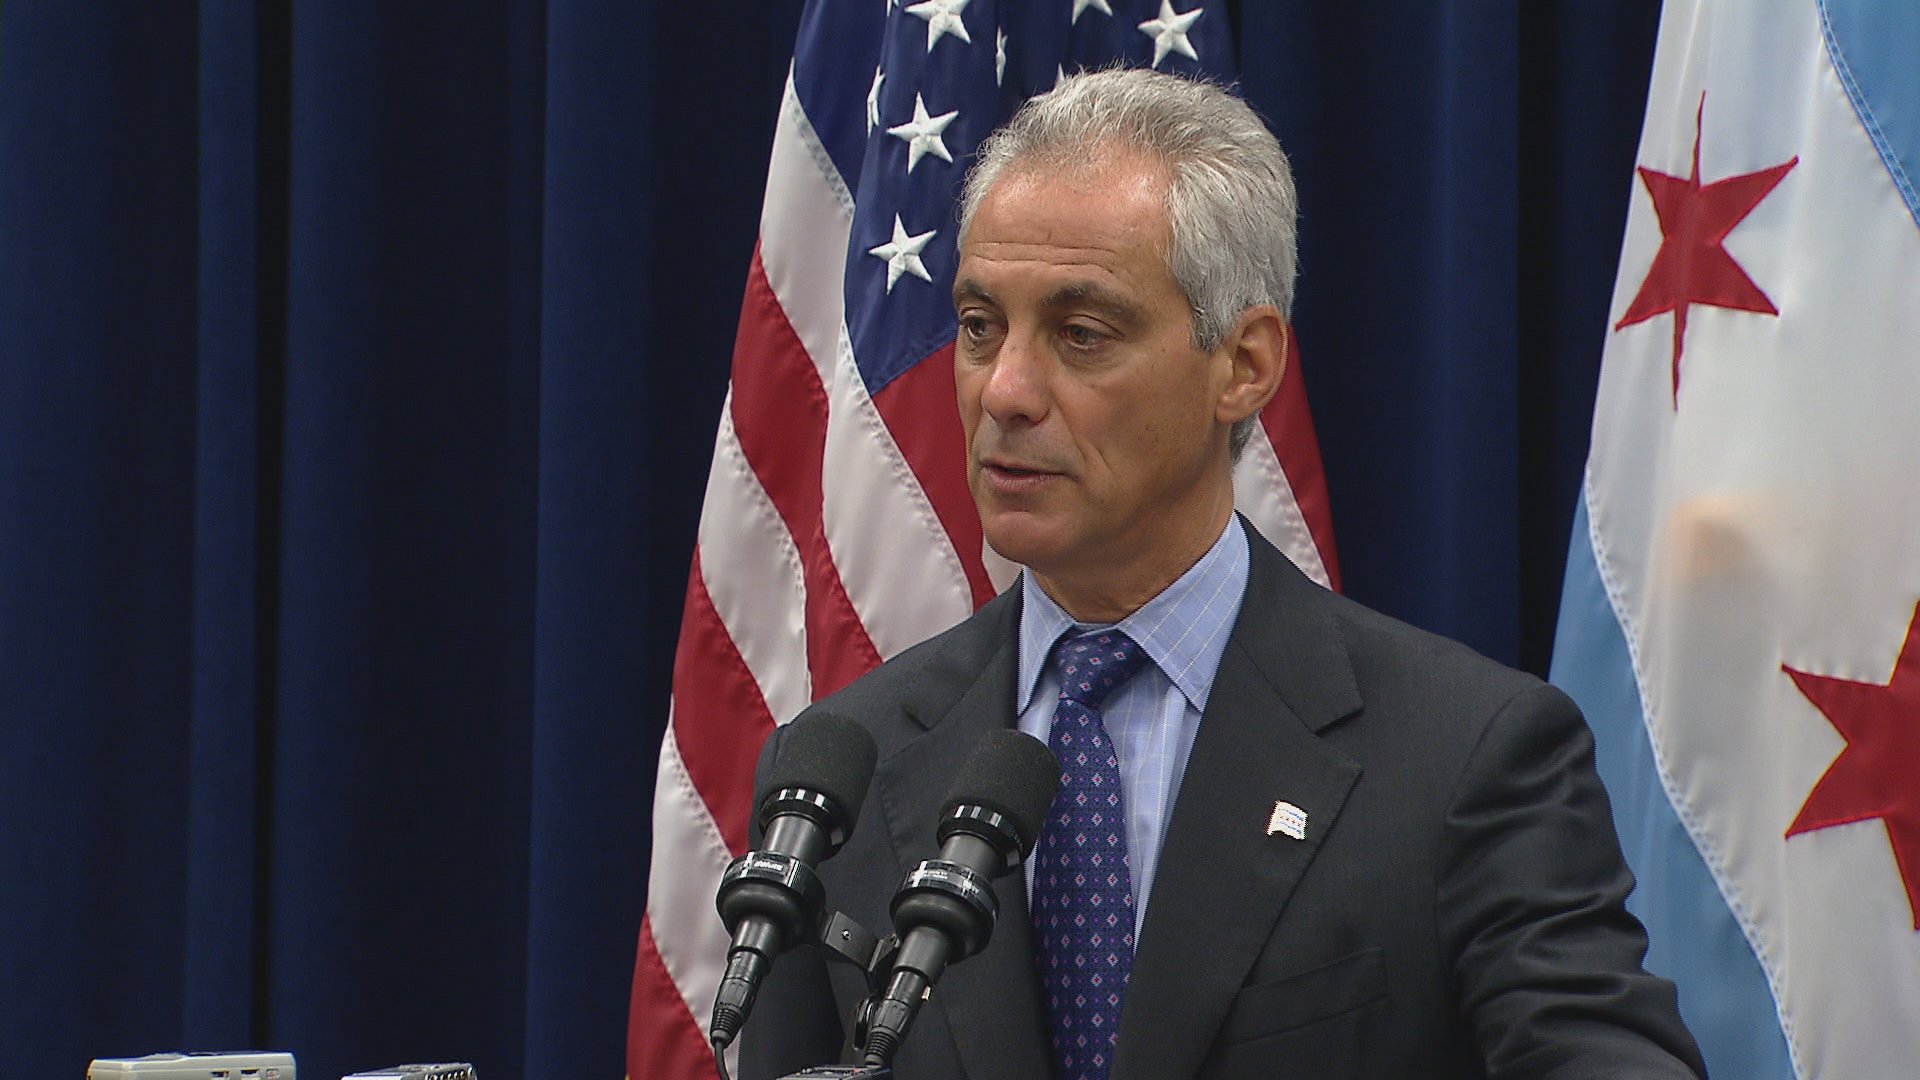 The Property Tax Rebate Program is designed to alleviate the financial burden for low-income and senior homeowners in Chicago. In a press release, Mayor Rahm Emanuel said the effort is "an important program for the city and provides hardworking homeowners some property tax relief." (Chicago Tonight)